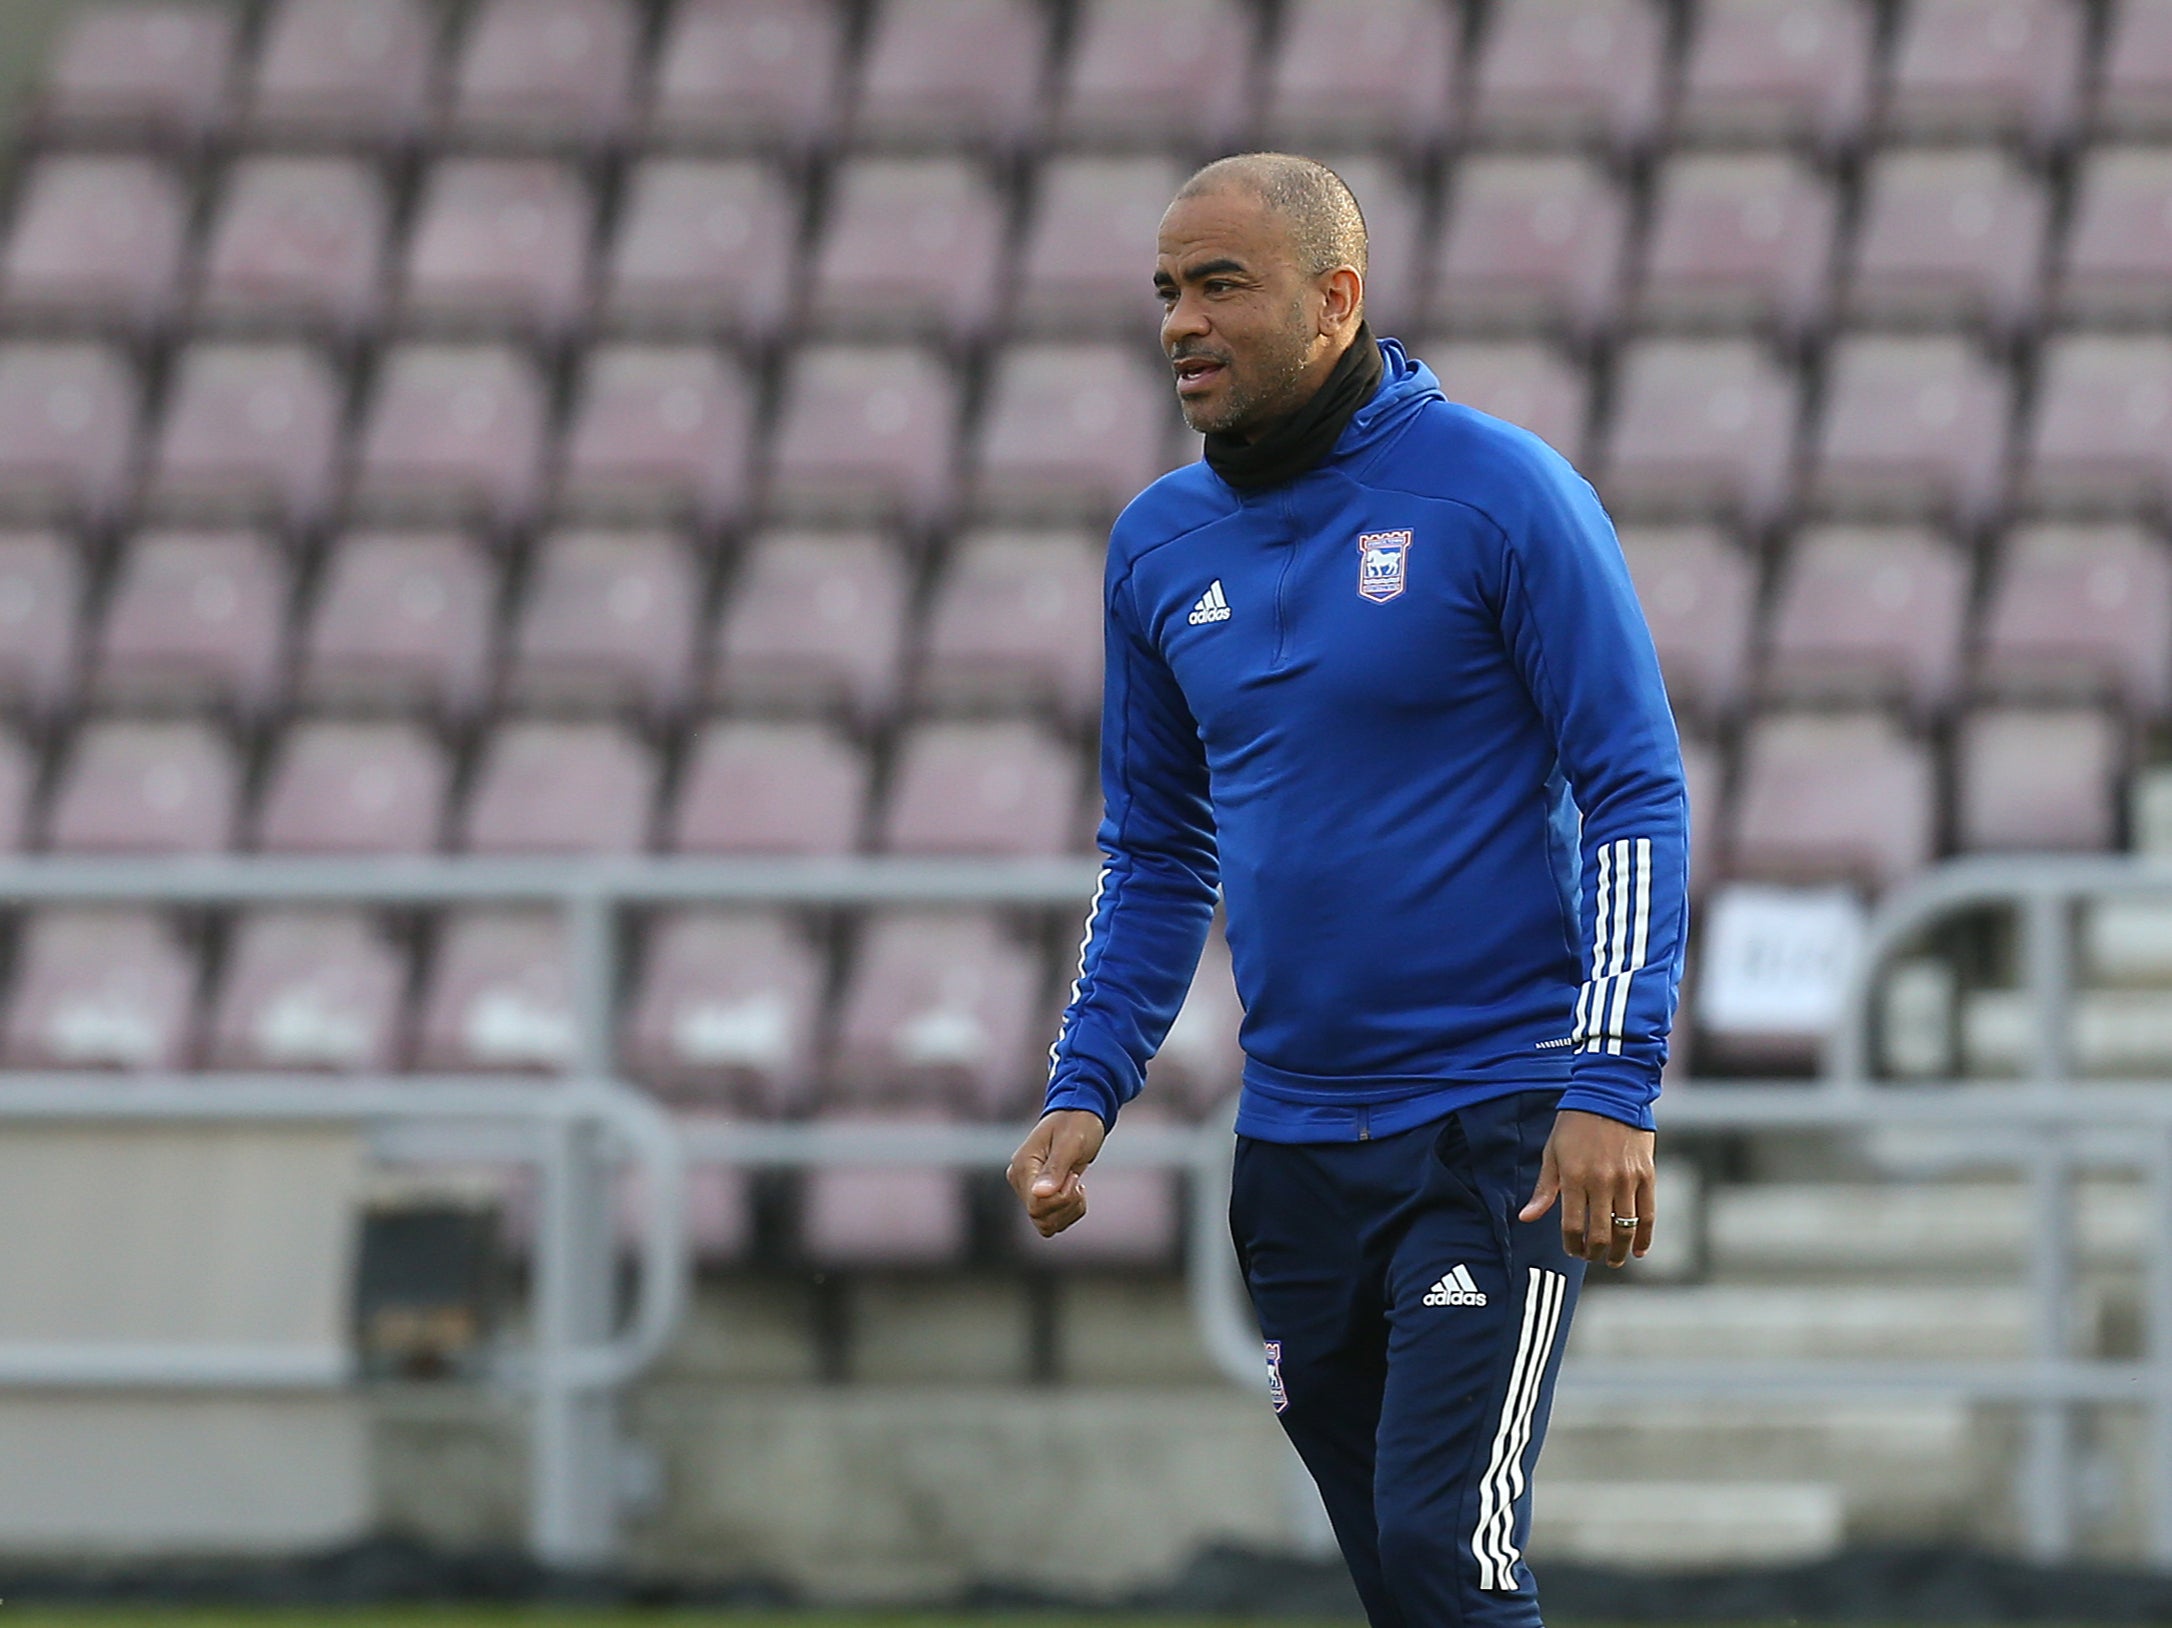 Kieron Dyer has been working as under-23s coach at Ipswich Town